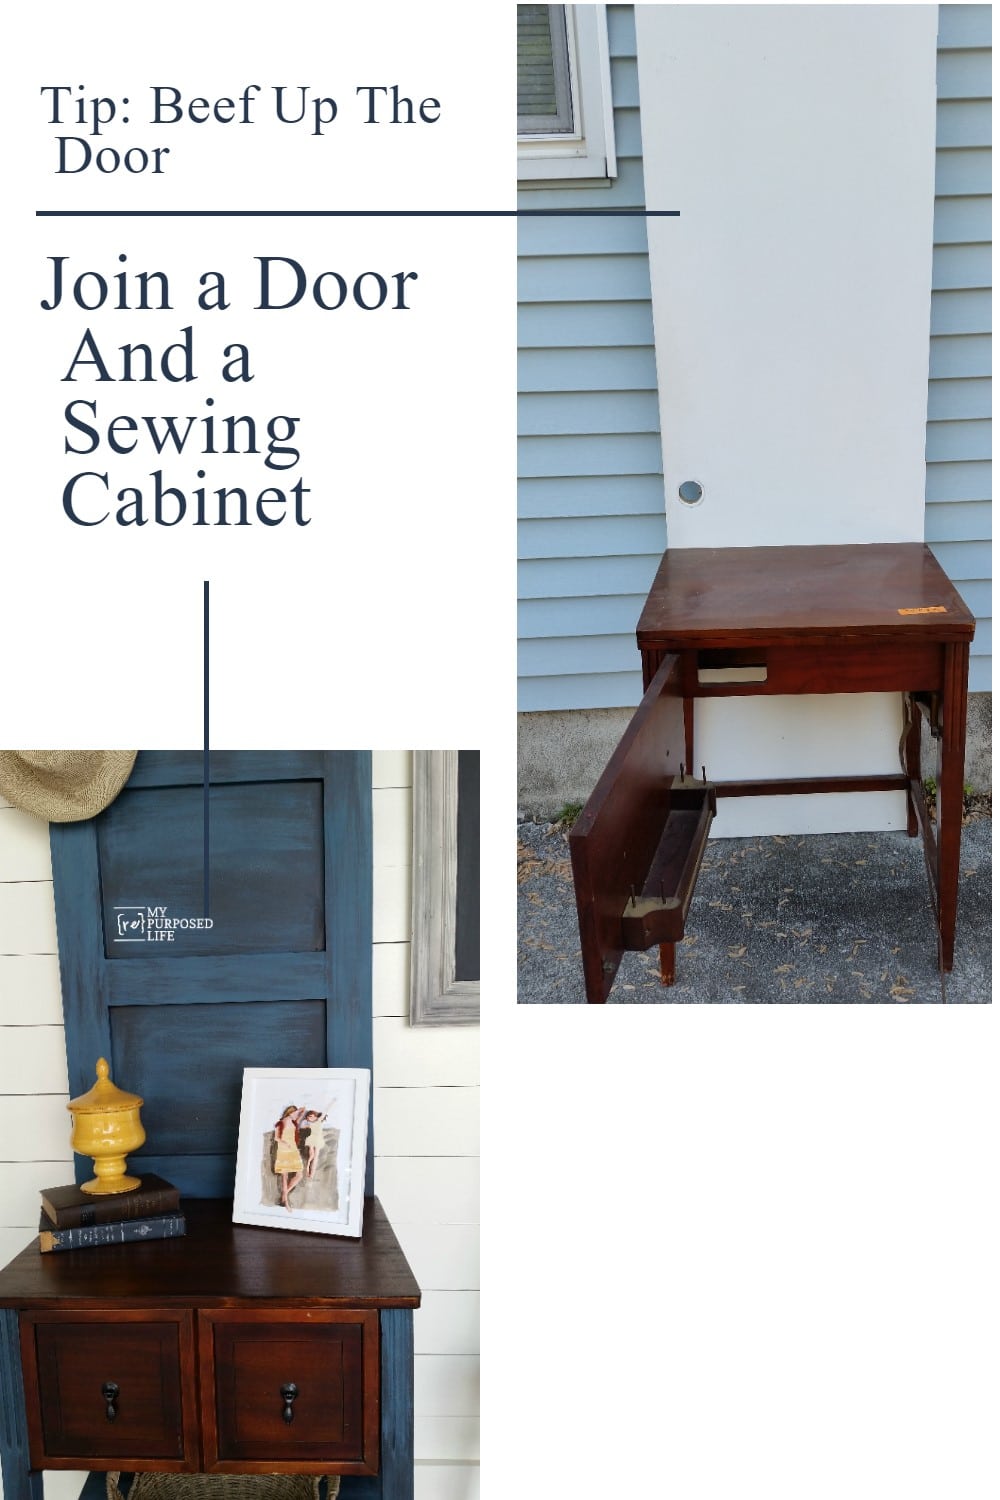 How to make a DIY hall tree table out of an old door and a sewing cabinet. I used a hollow door and trimmed it out with some boards to add more character. #MyRepurposedLife #repurposed #furniture #sewingcabinet #halltree #diy via @repurposedlife